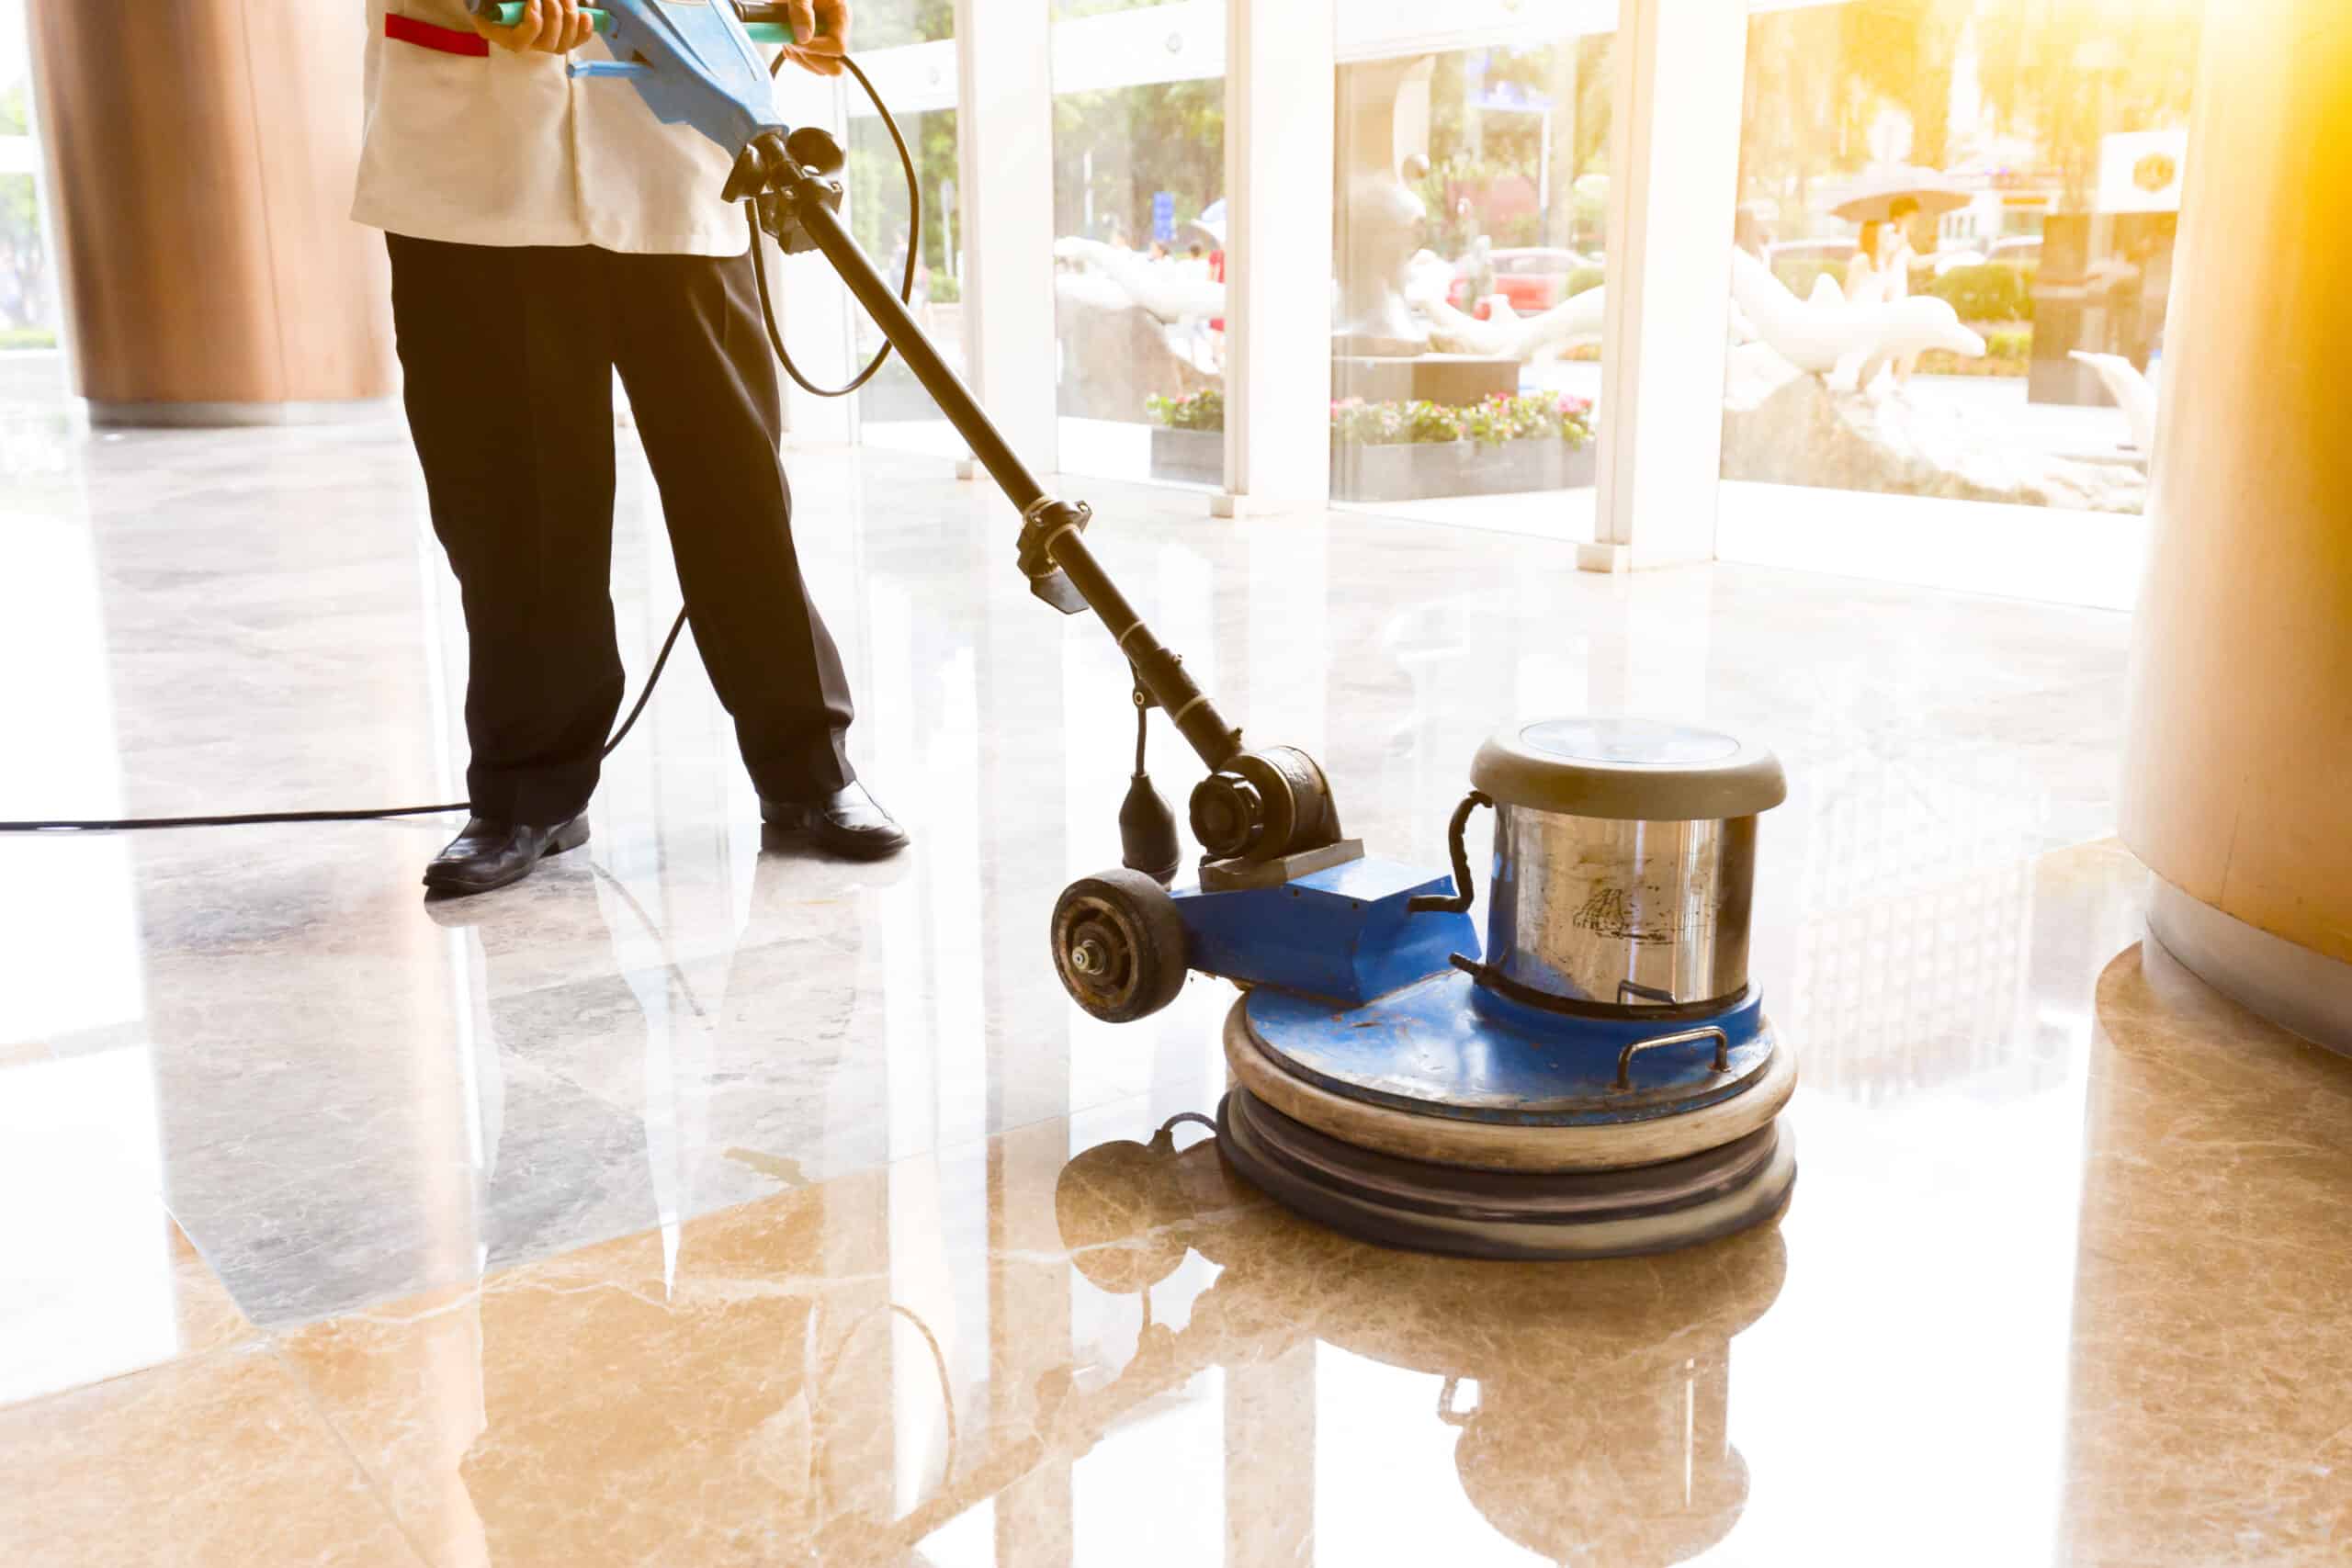 Clean and Maintain Tile Floors With Industrial Scrubbers